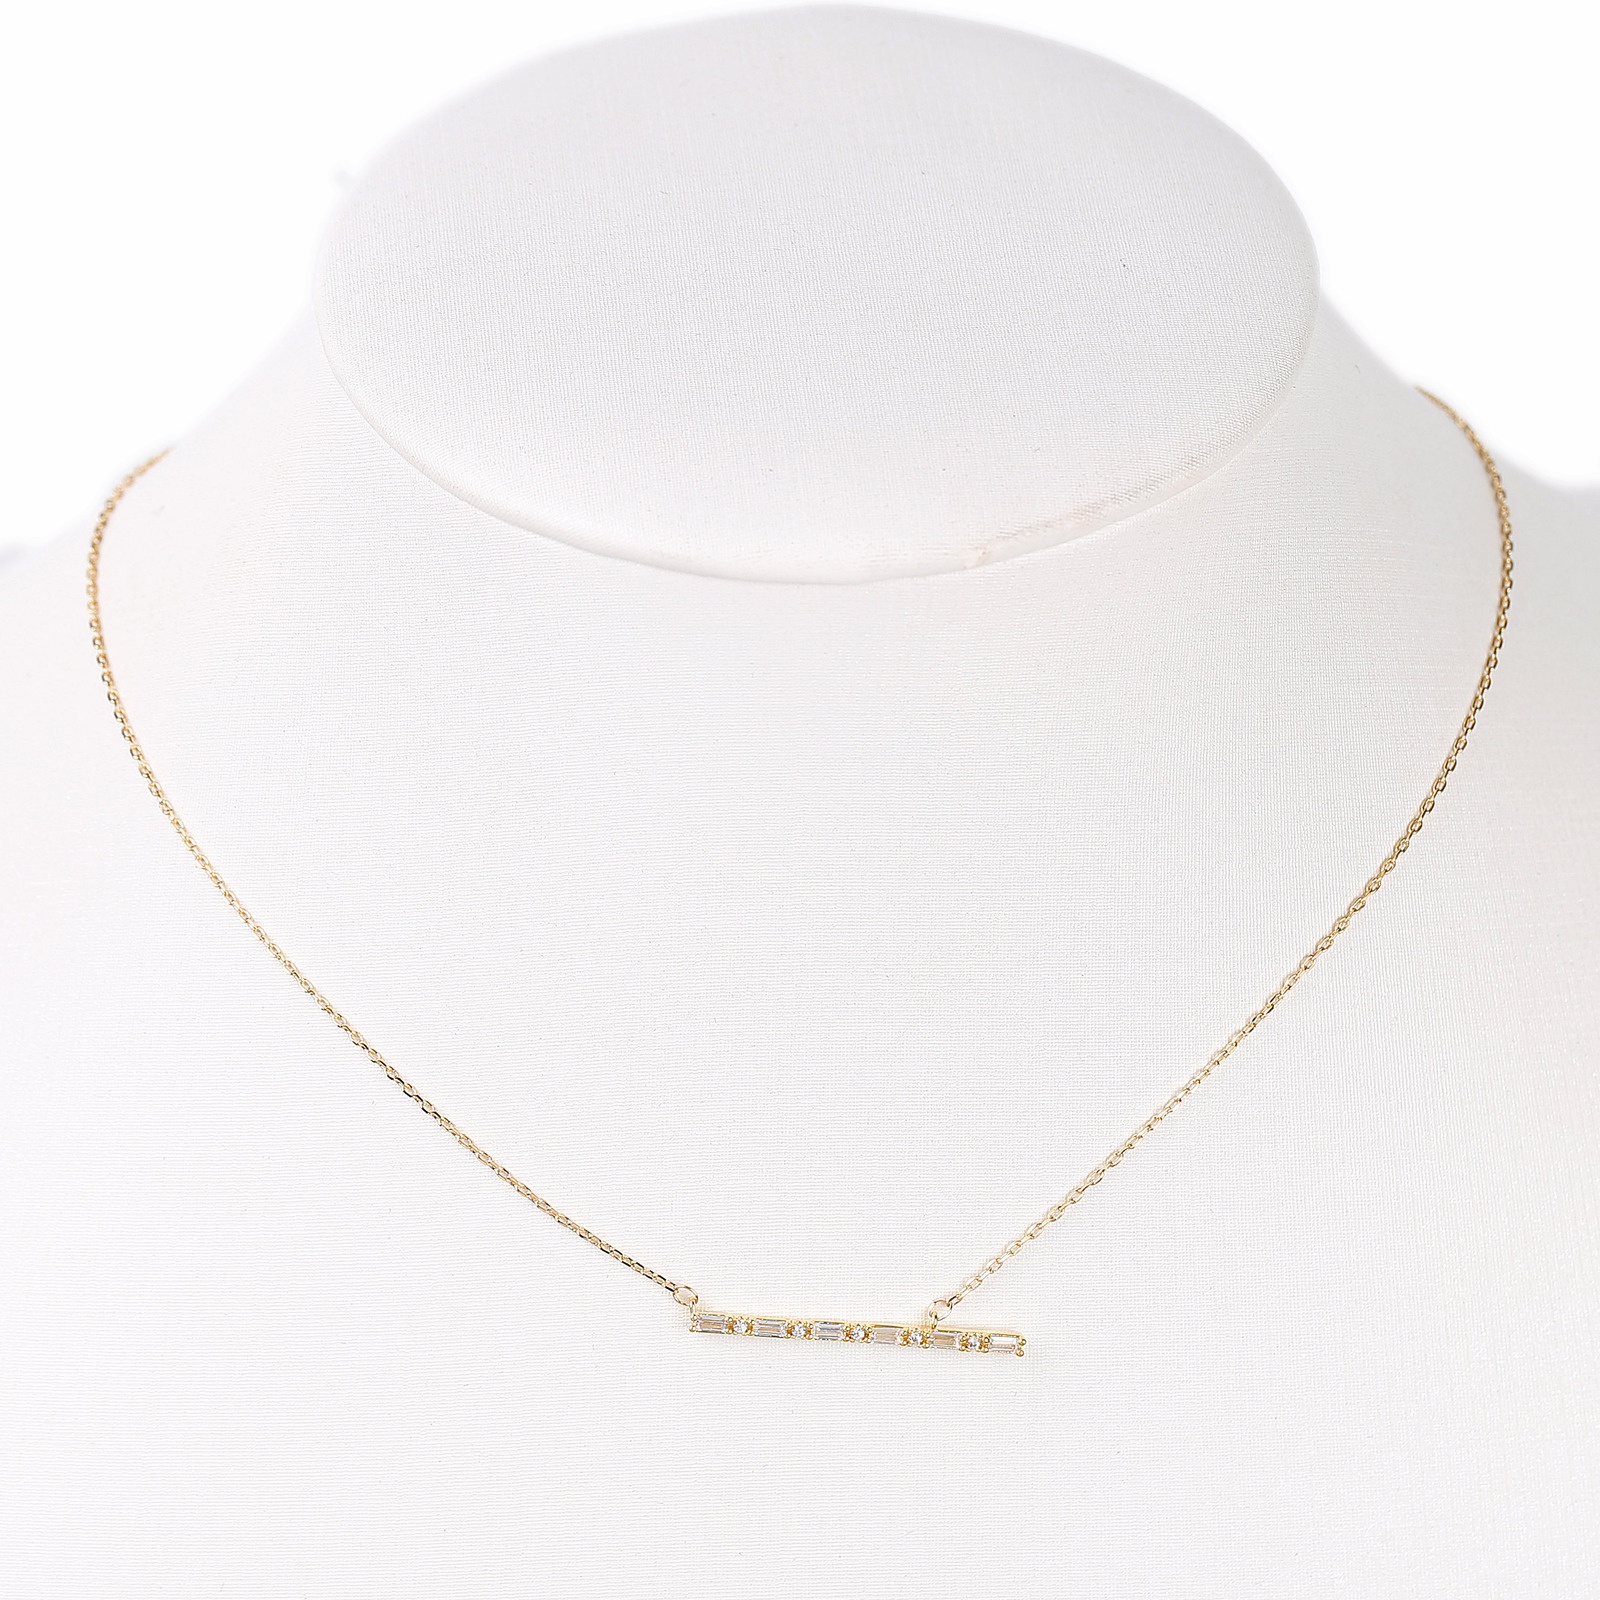 gold tone bar necklace with sparkling swarovski style crystals